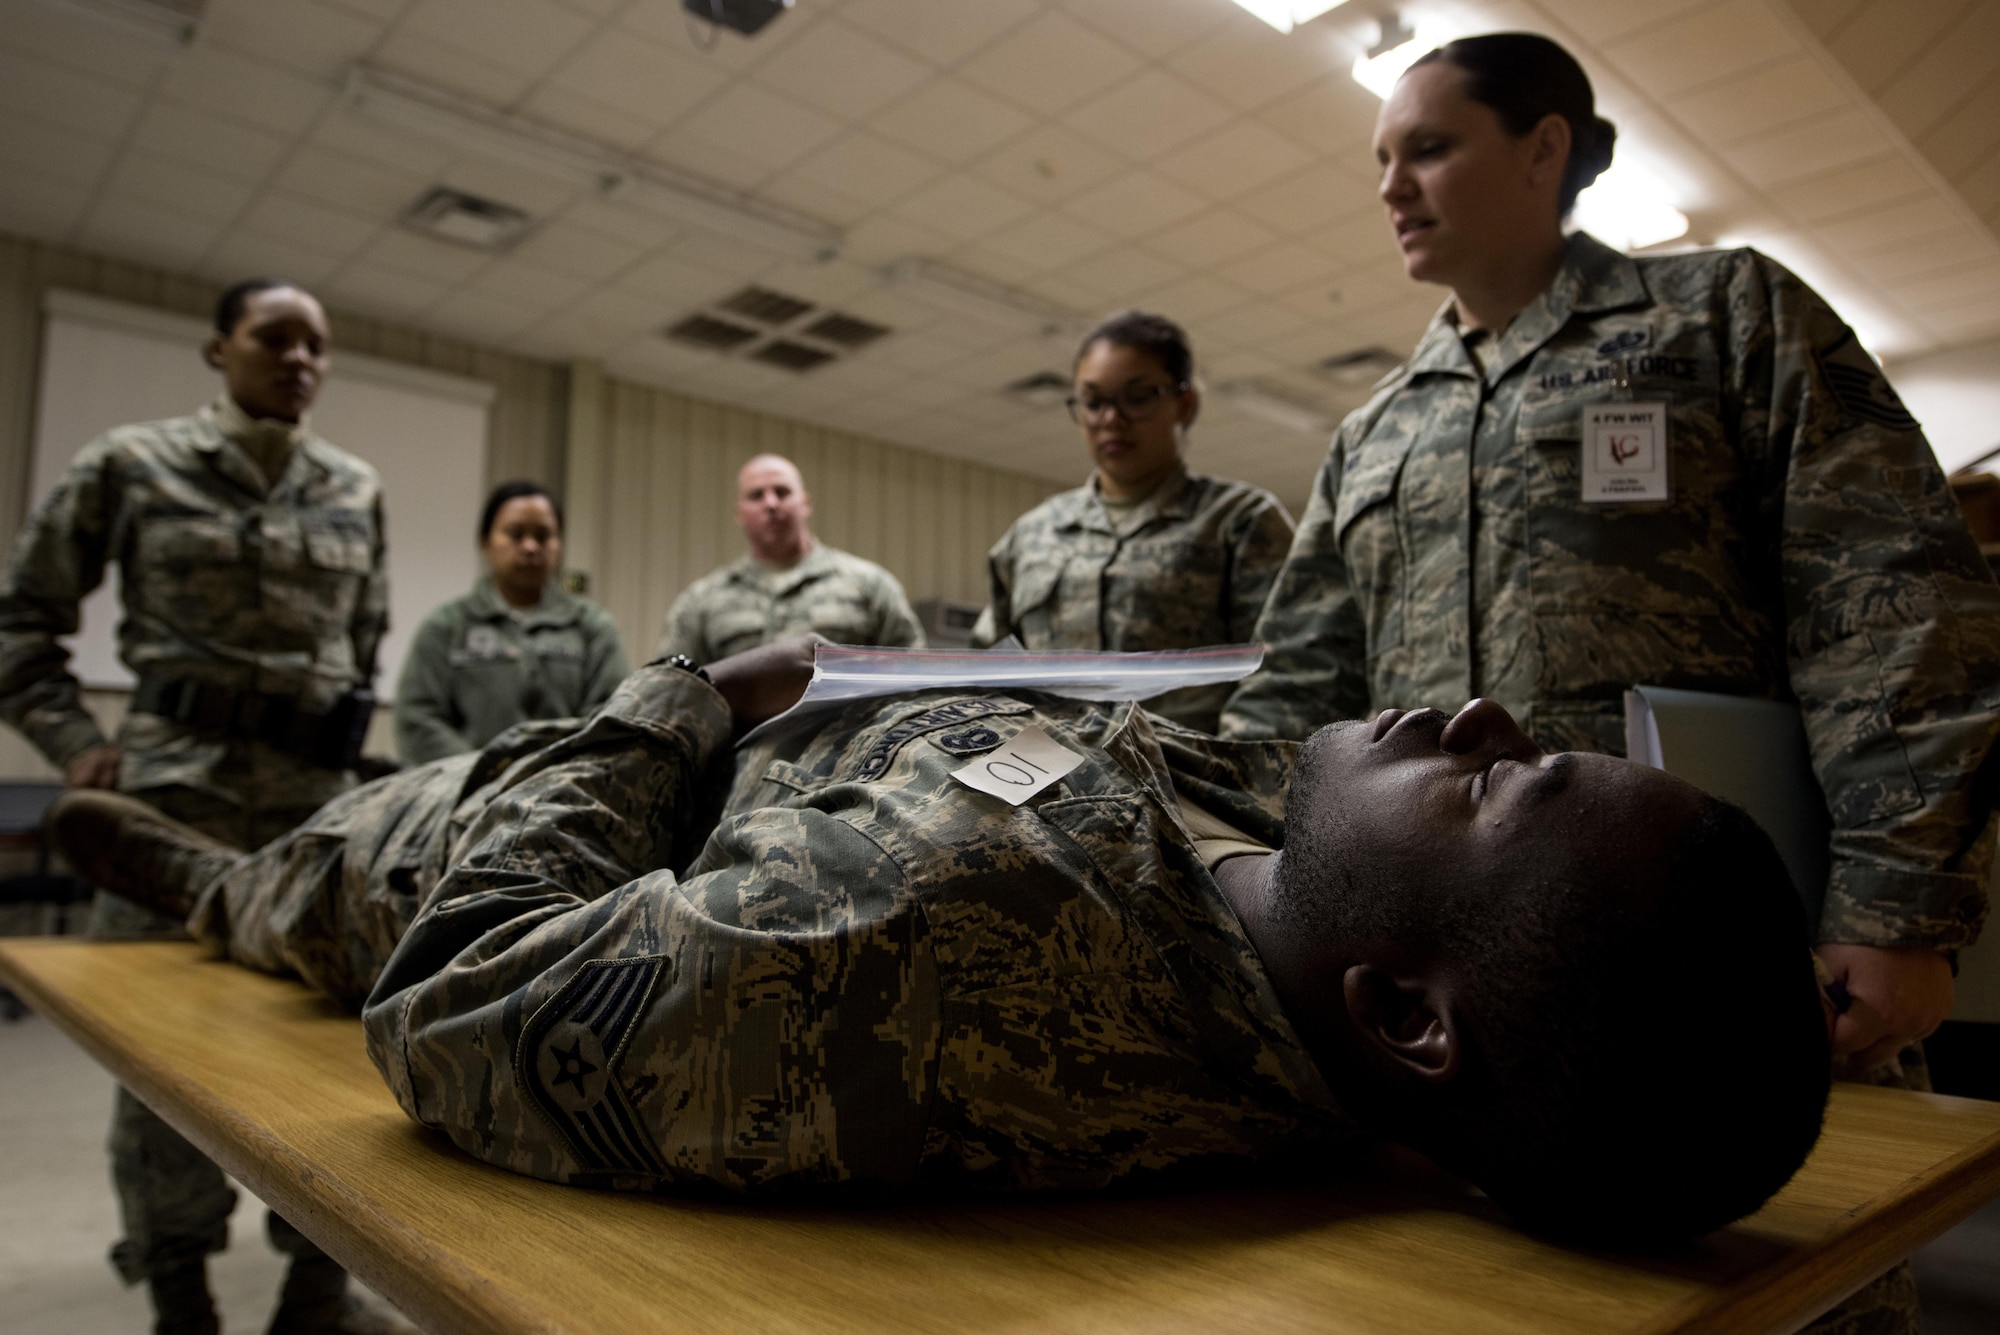 Staff Sgt. Damyan Jackson, 4th Logistic Readiness Squadron vehicle operator, acts as a casualty during exercise Coronet Warrior 17-01, Jan. 31, 2017, at Seymour Johnson Air Force Base, North Carolina. Master Sgt. Julie Nix, 4th Force Support Squadron wing inspection team member, evaluated the mortuary affairs procedures of participating 4th FSS Airmen. (U.S. Air Force photo by Airman Shawna L. Keyes)